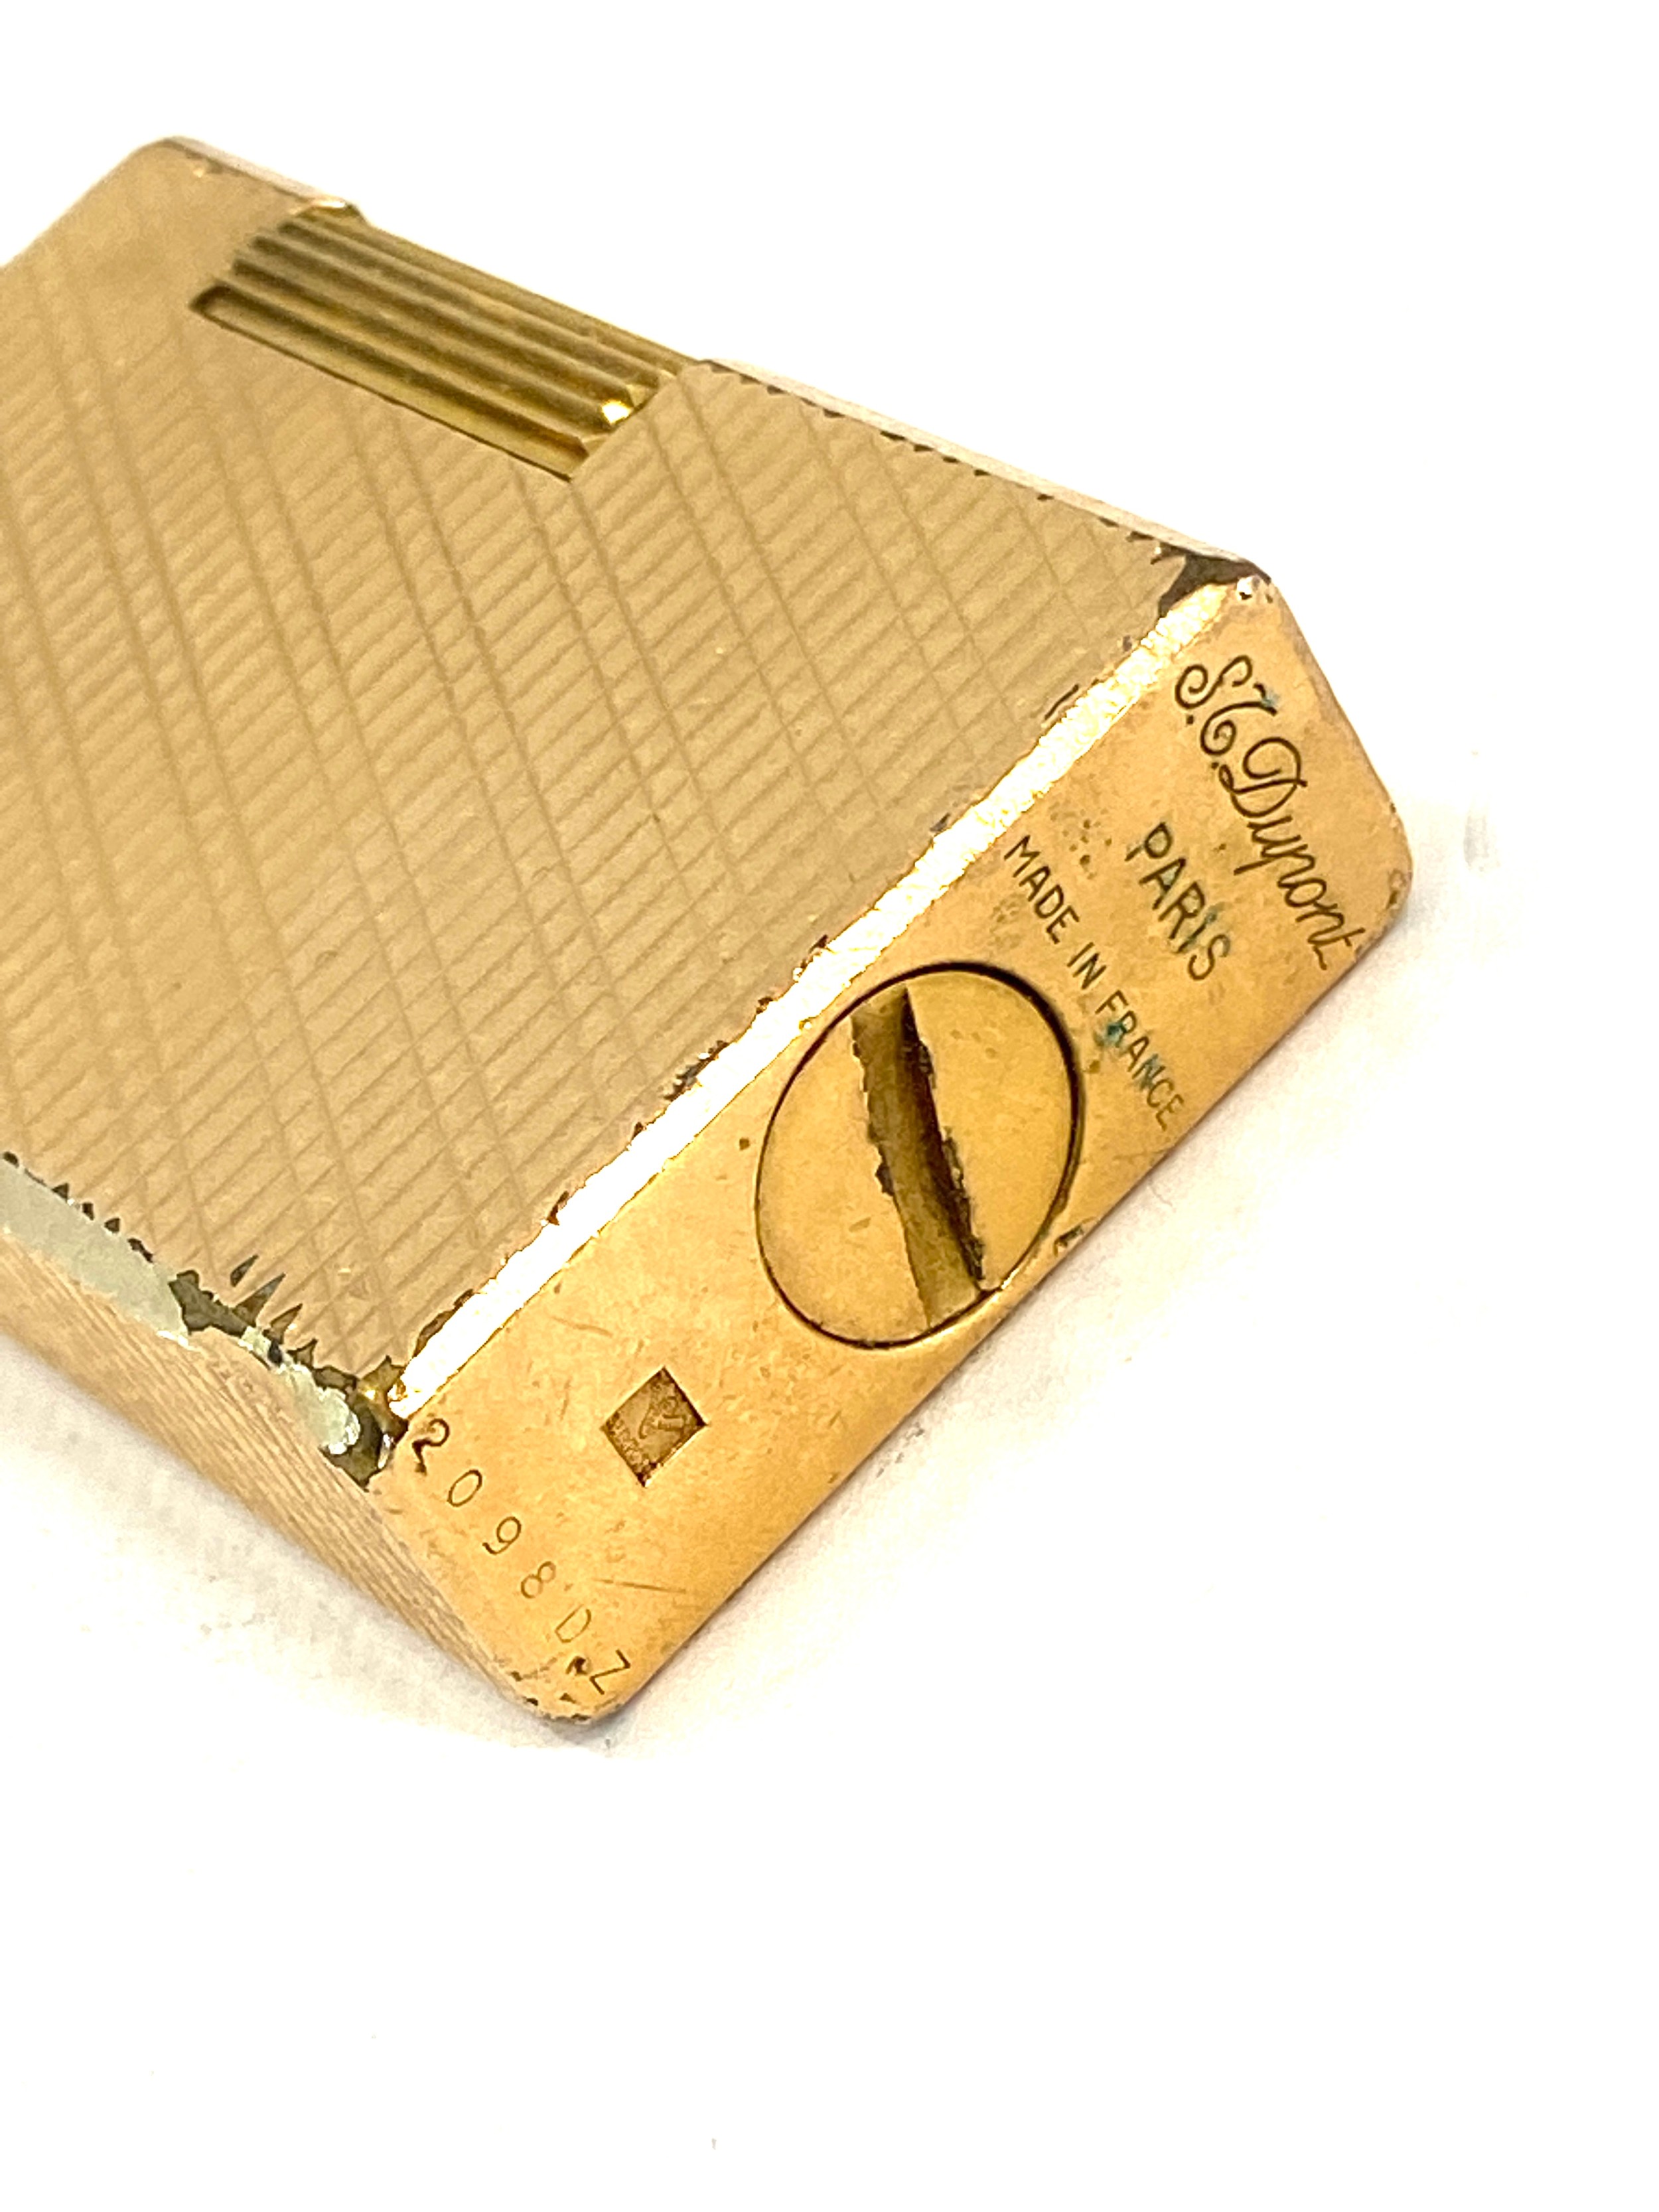 Gold plated cigarette lighter by Dupont Paris - Image 3 of 4